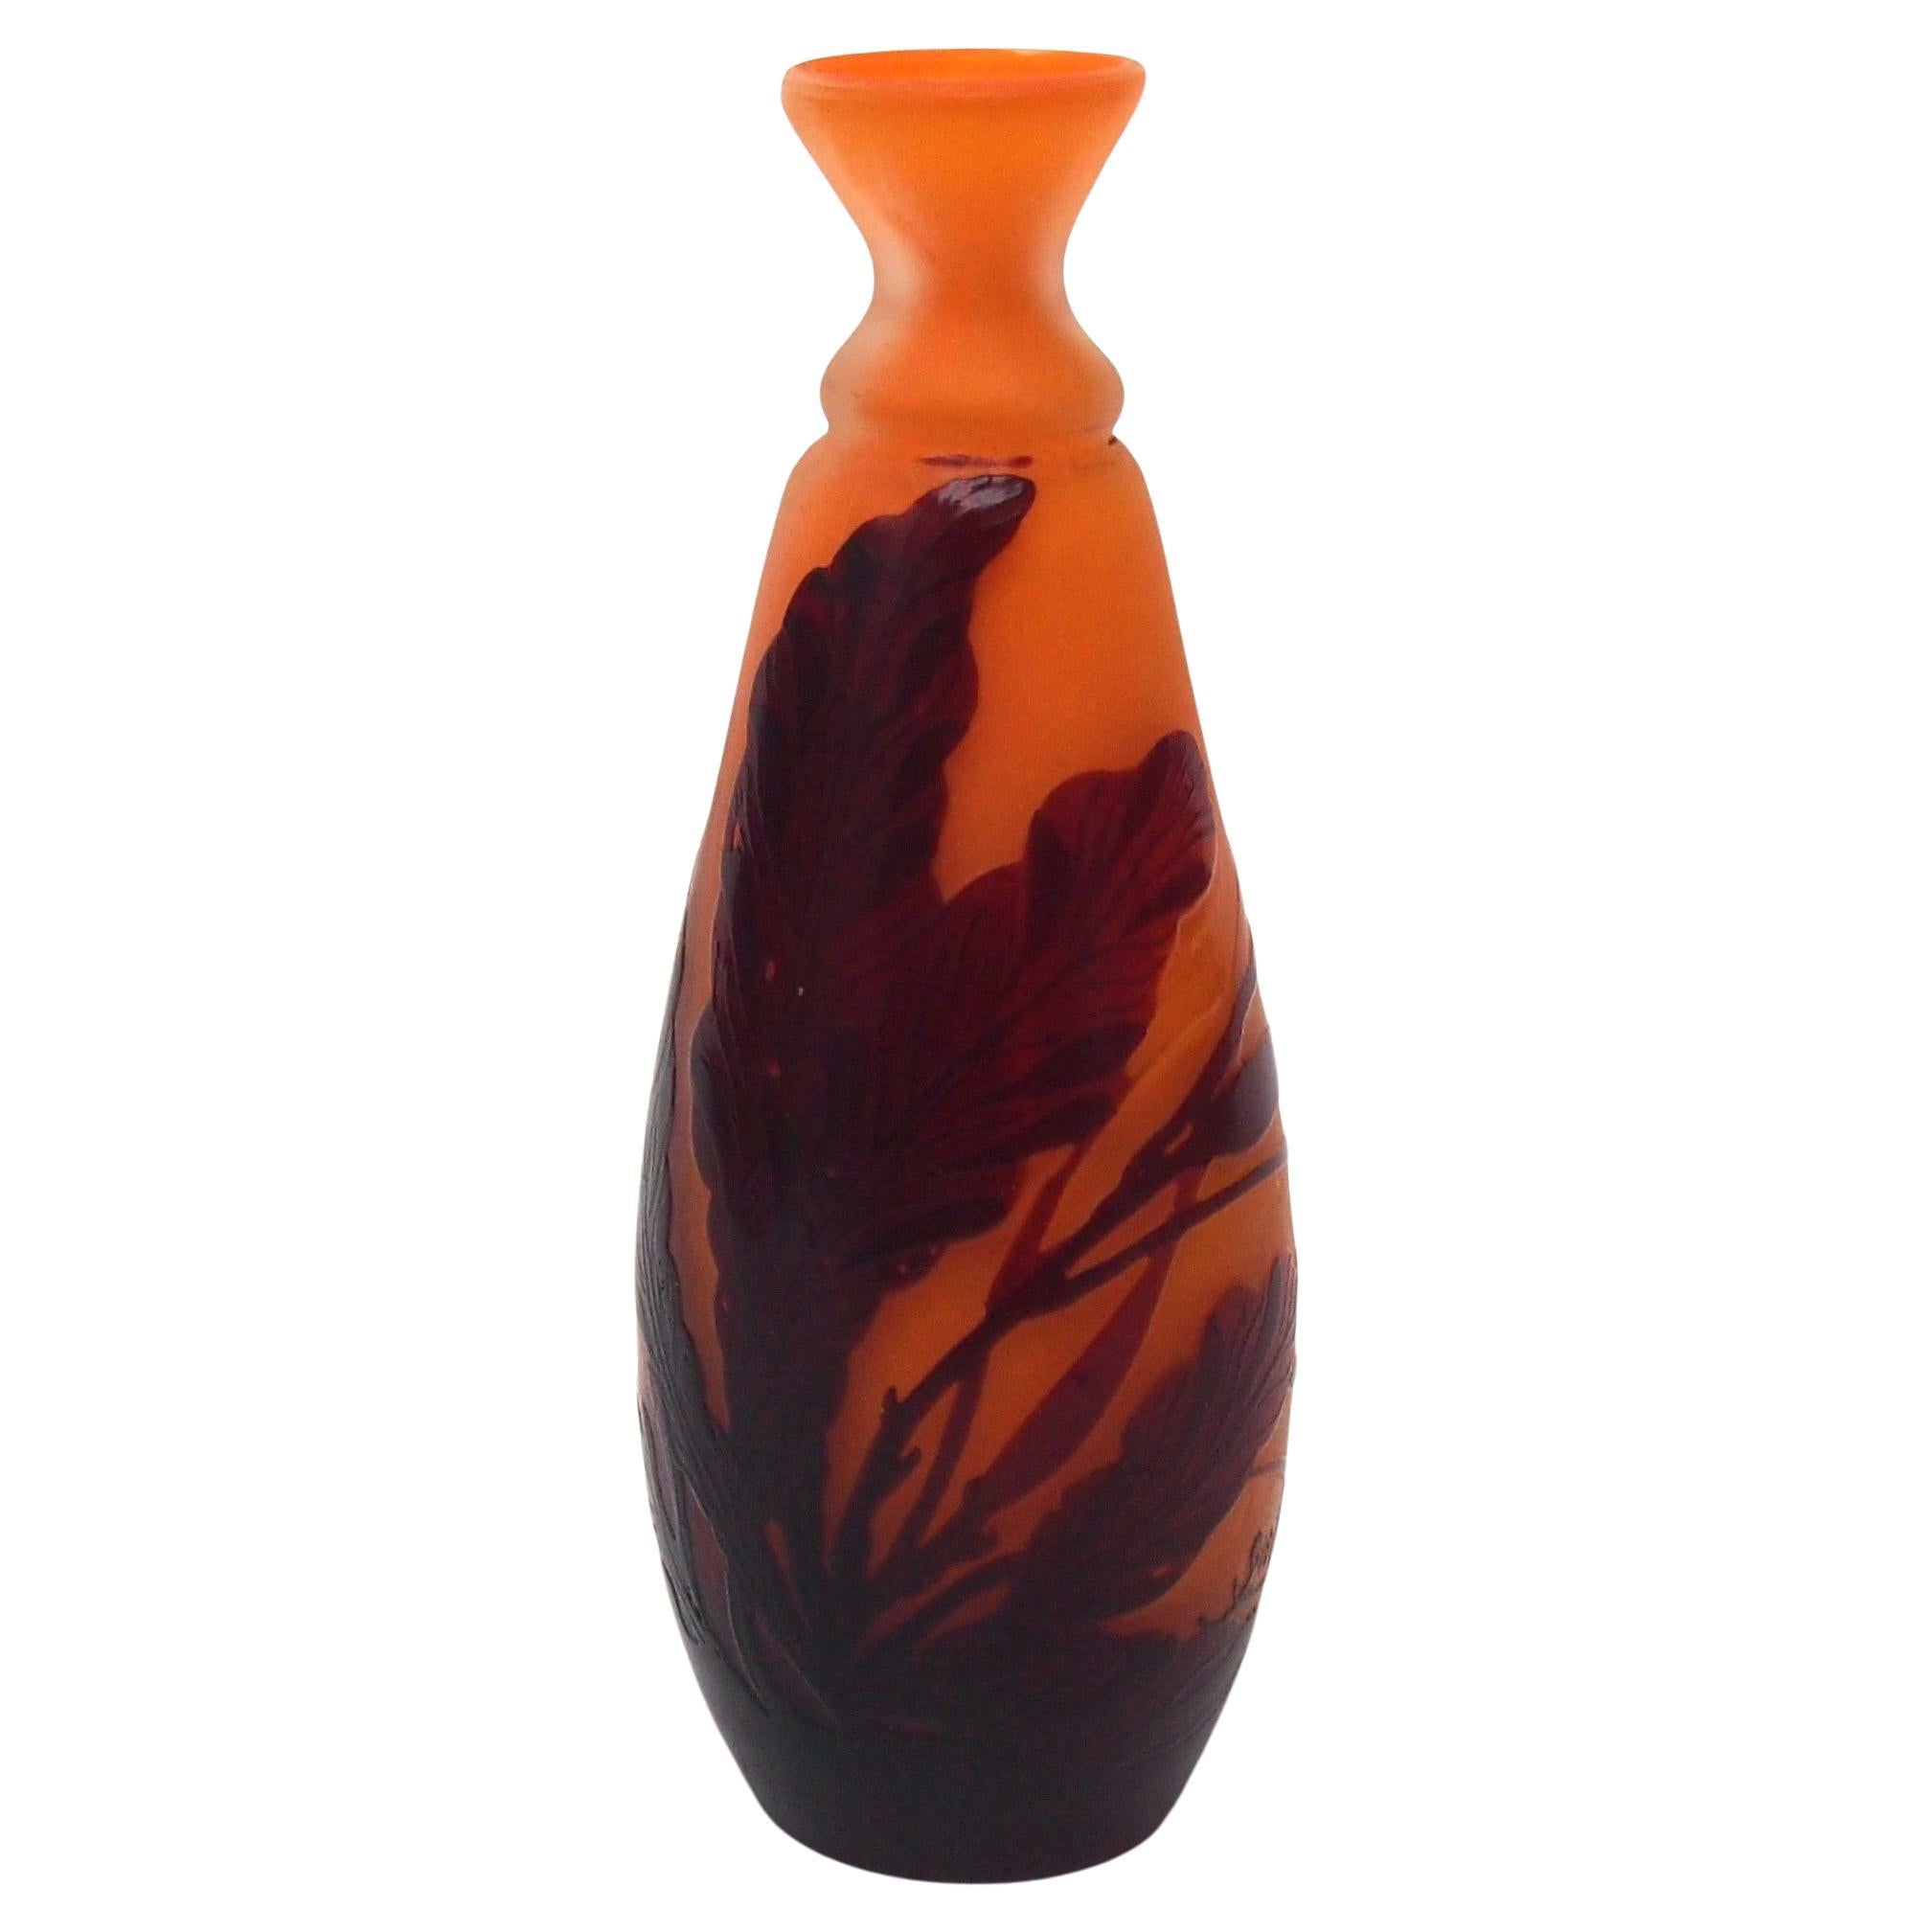 Rare French Art Nouveau Emile Galle Cameo Glass Vase Seaweed -Wartime Production For Sale